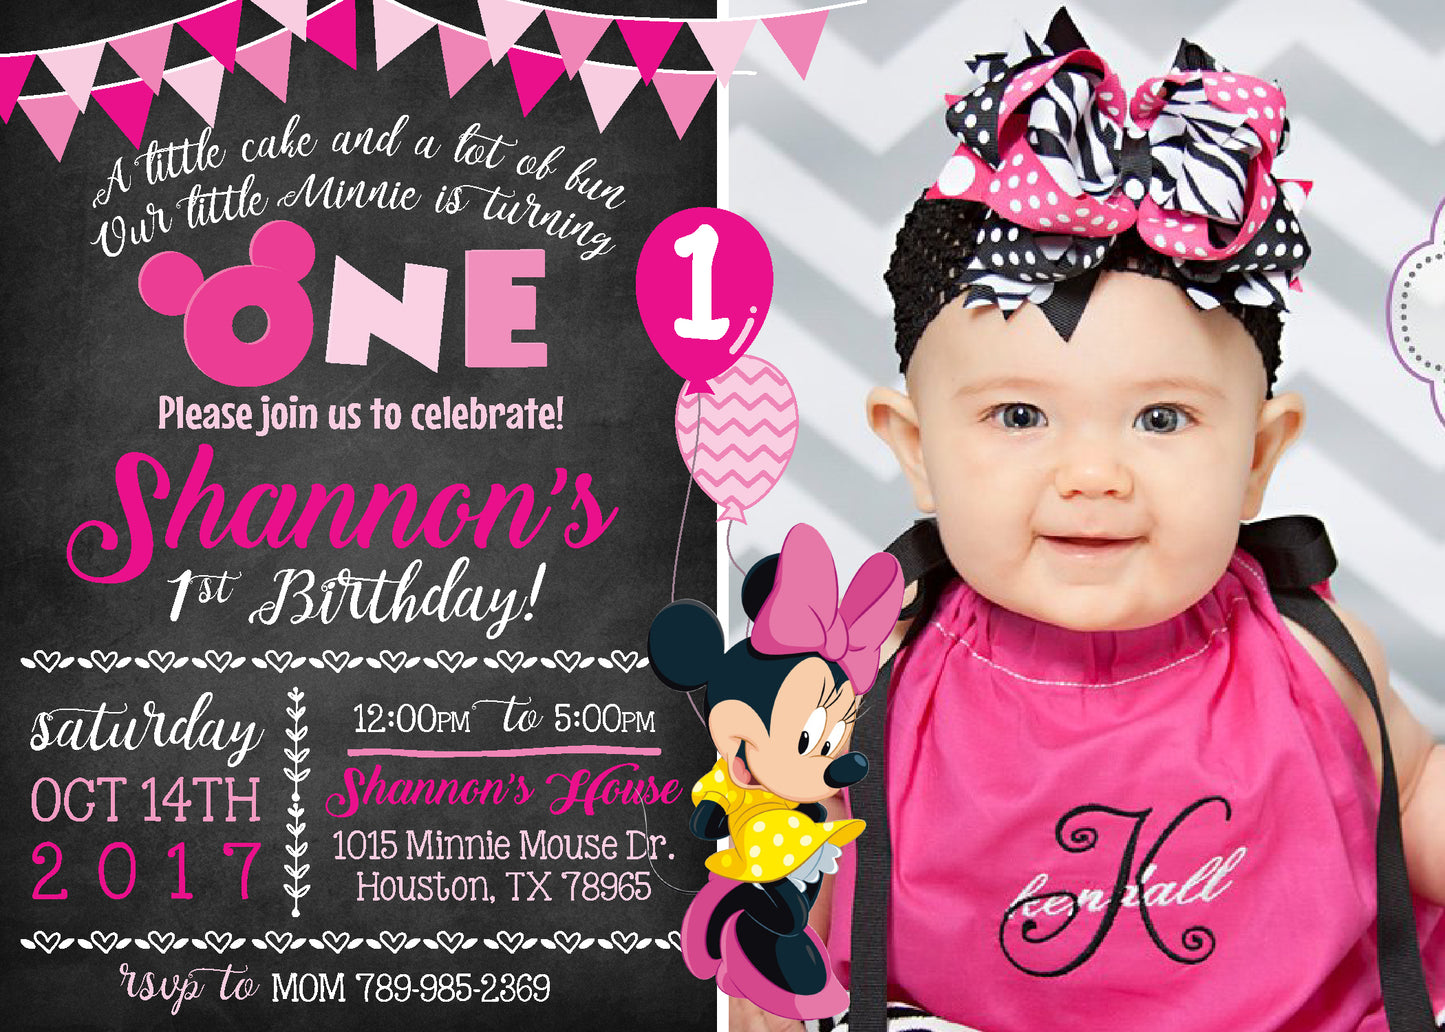 Adorable MINNIE MOUSE Birthday Invitation with Photo! Printed or Digital!